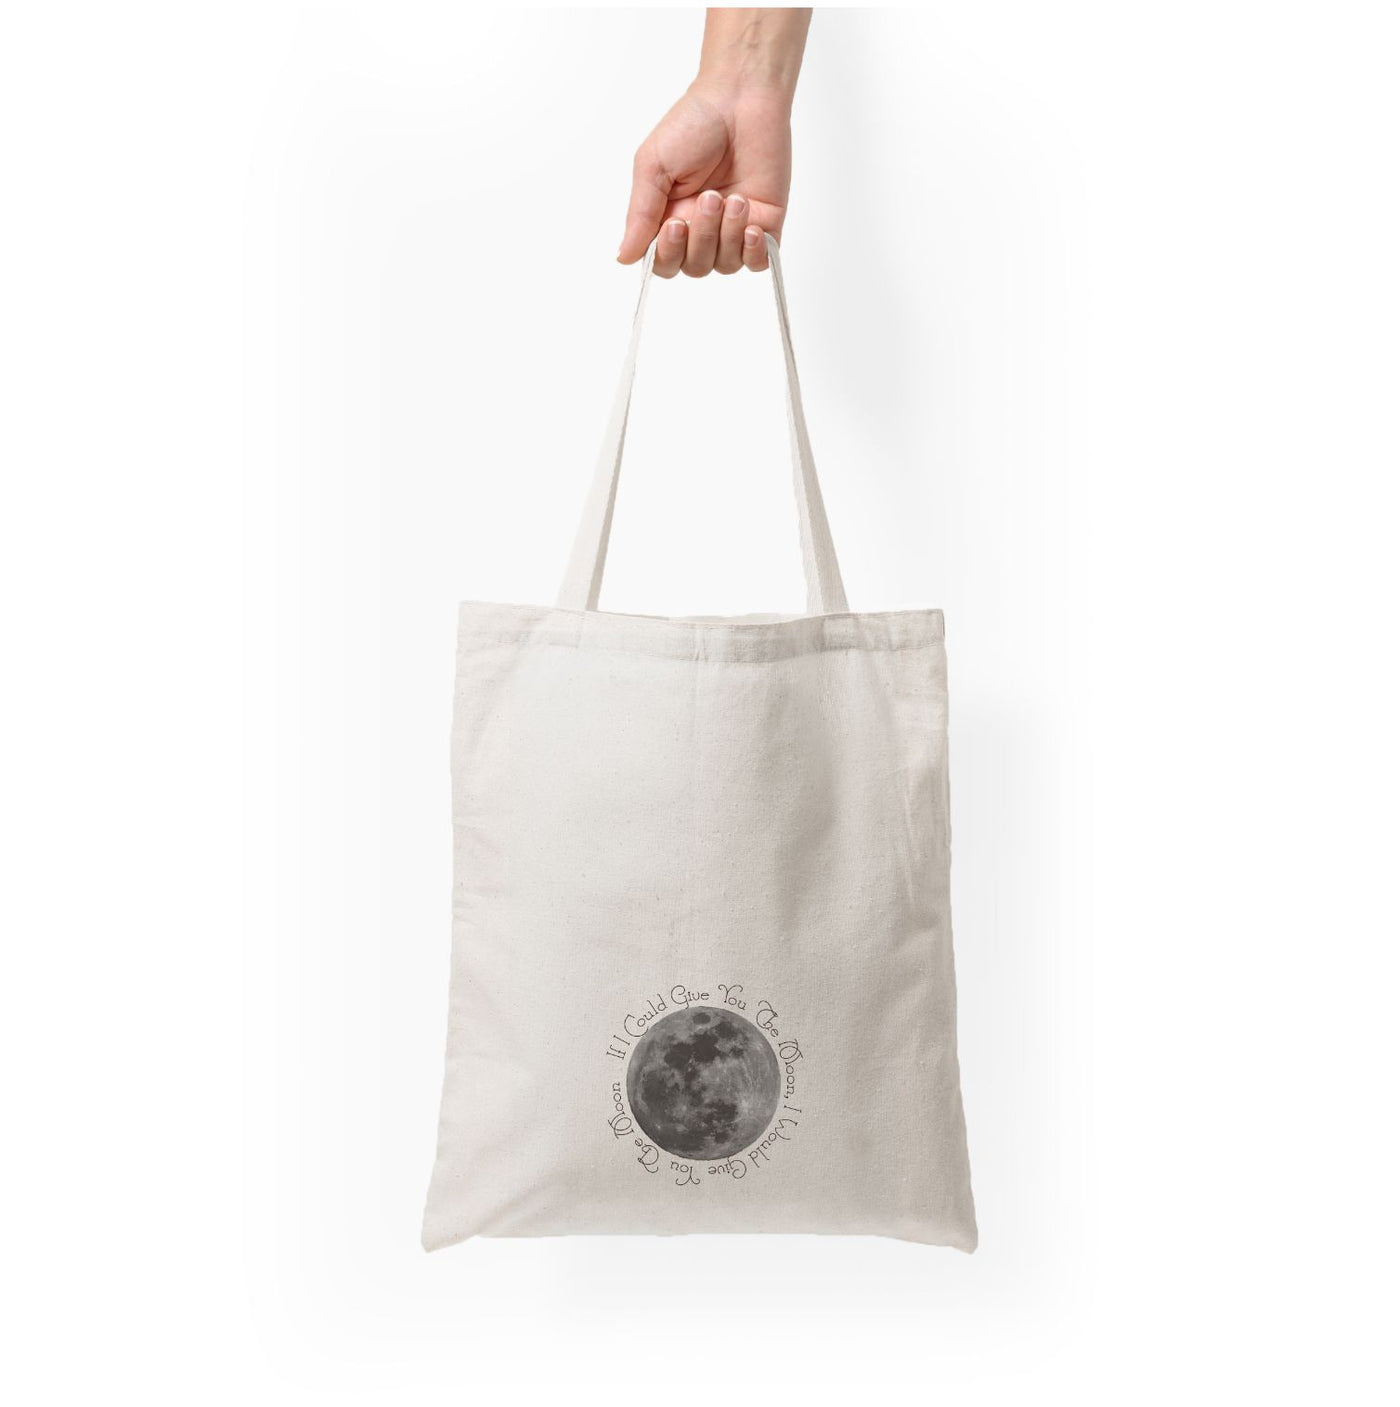 If I Could Give You The Moon - Phoebe Bridgers Tote Bag